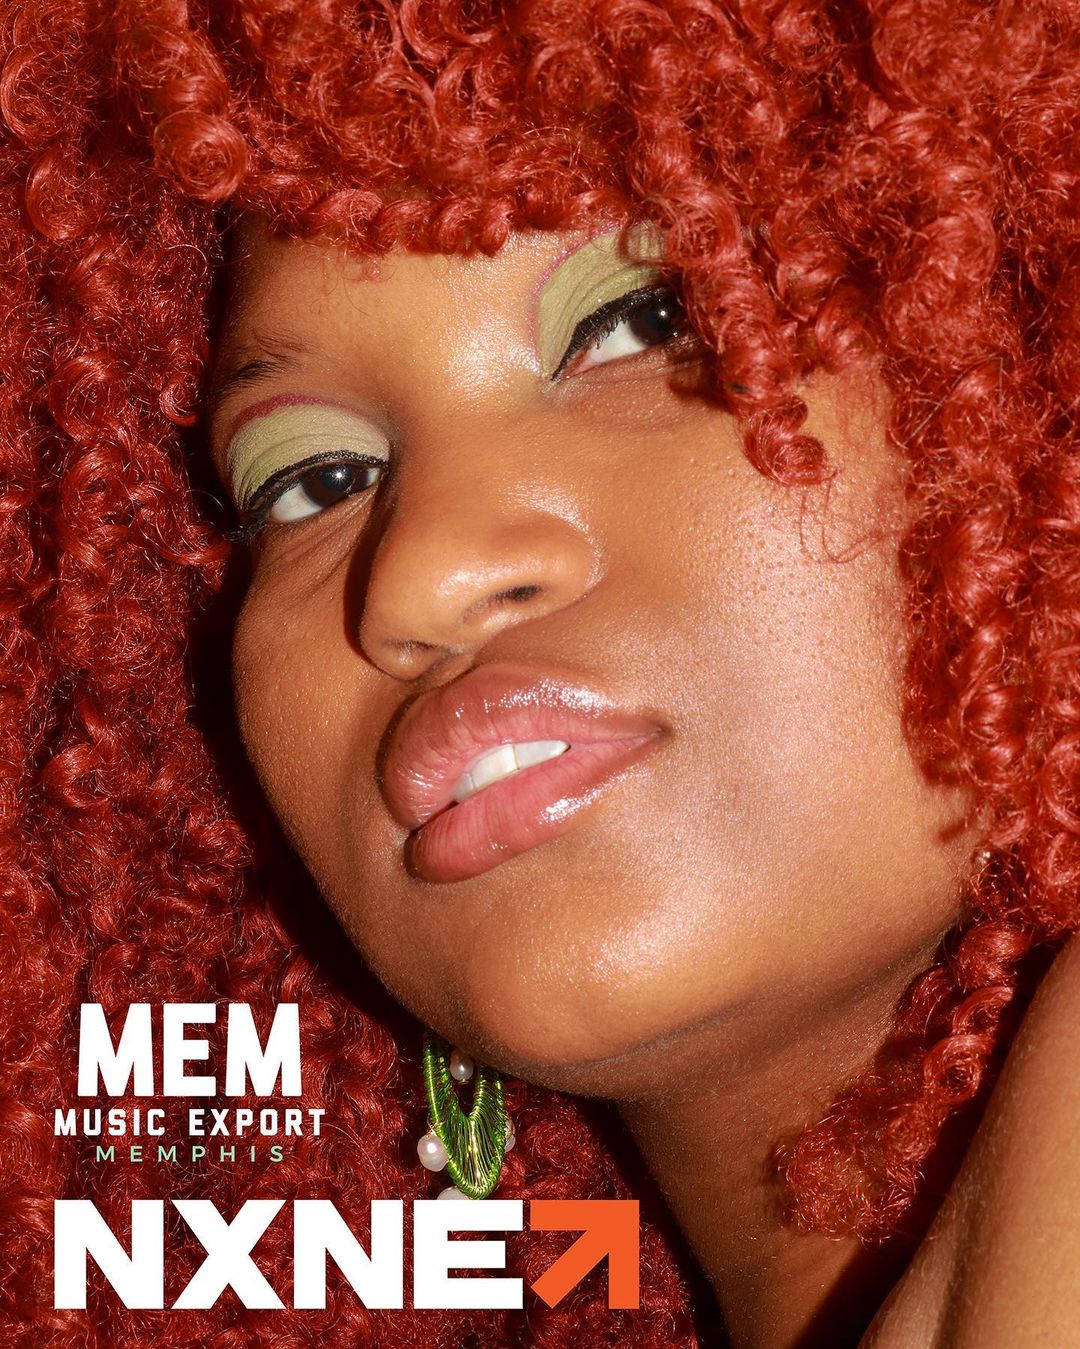 A woman with red afro hair is posing for a photo at a MEM party wearing a tambourine bash shirt.